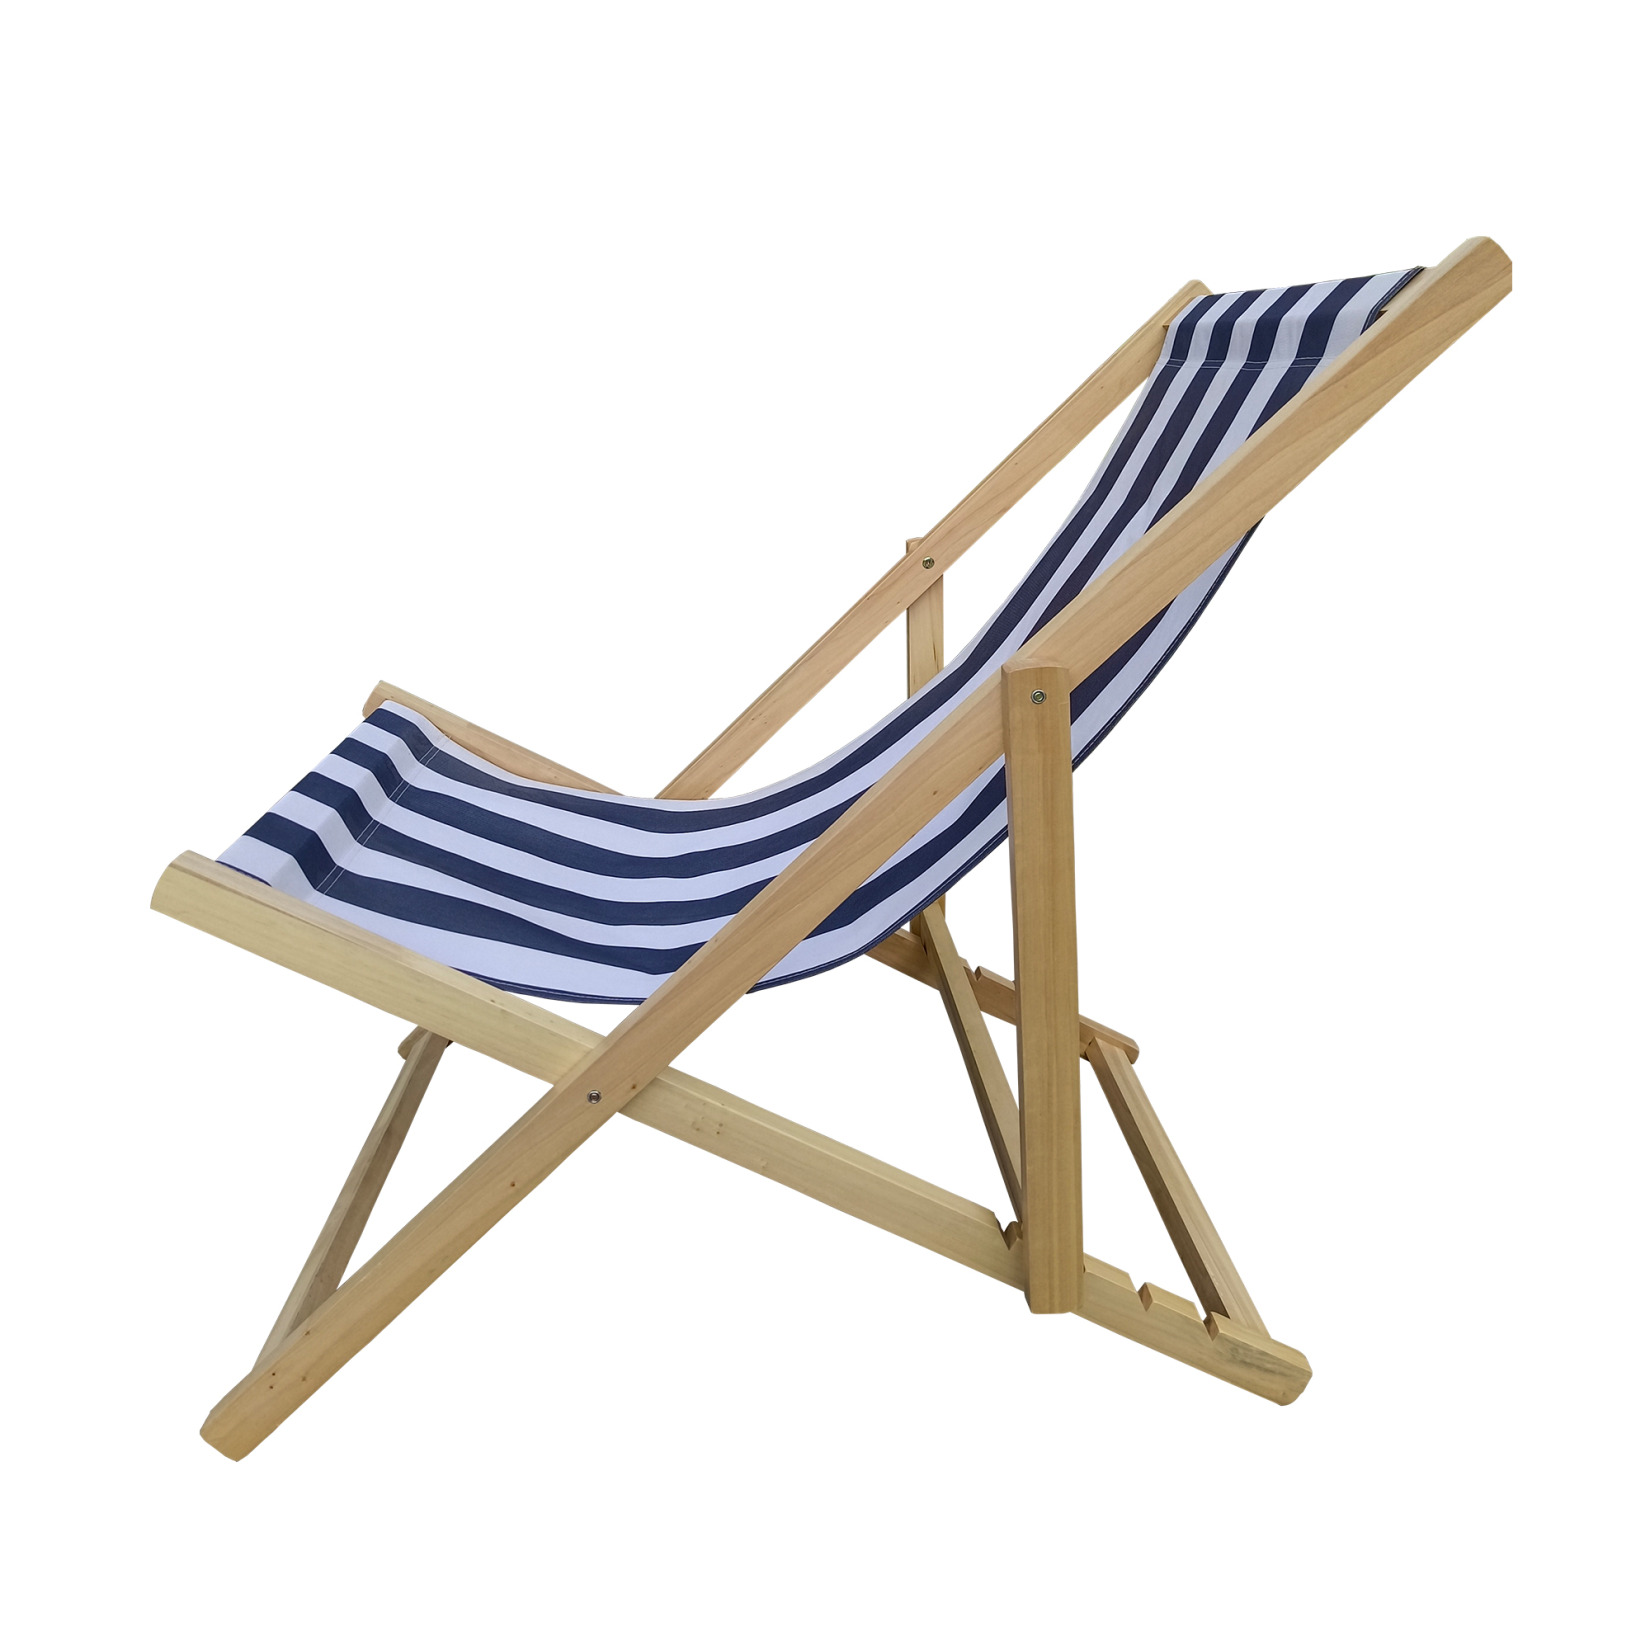 Outdoor Folding Beach Chaise Lounge Chair Camping Recliner, Sling Chair Beach Recliner, Beach Chair with Adjustable Back, Pool Chair Outdoor Chair Garden Chair, Portable Chair - image 4 of 8